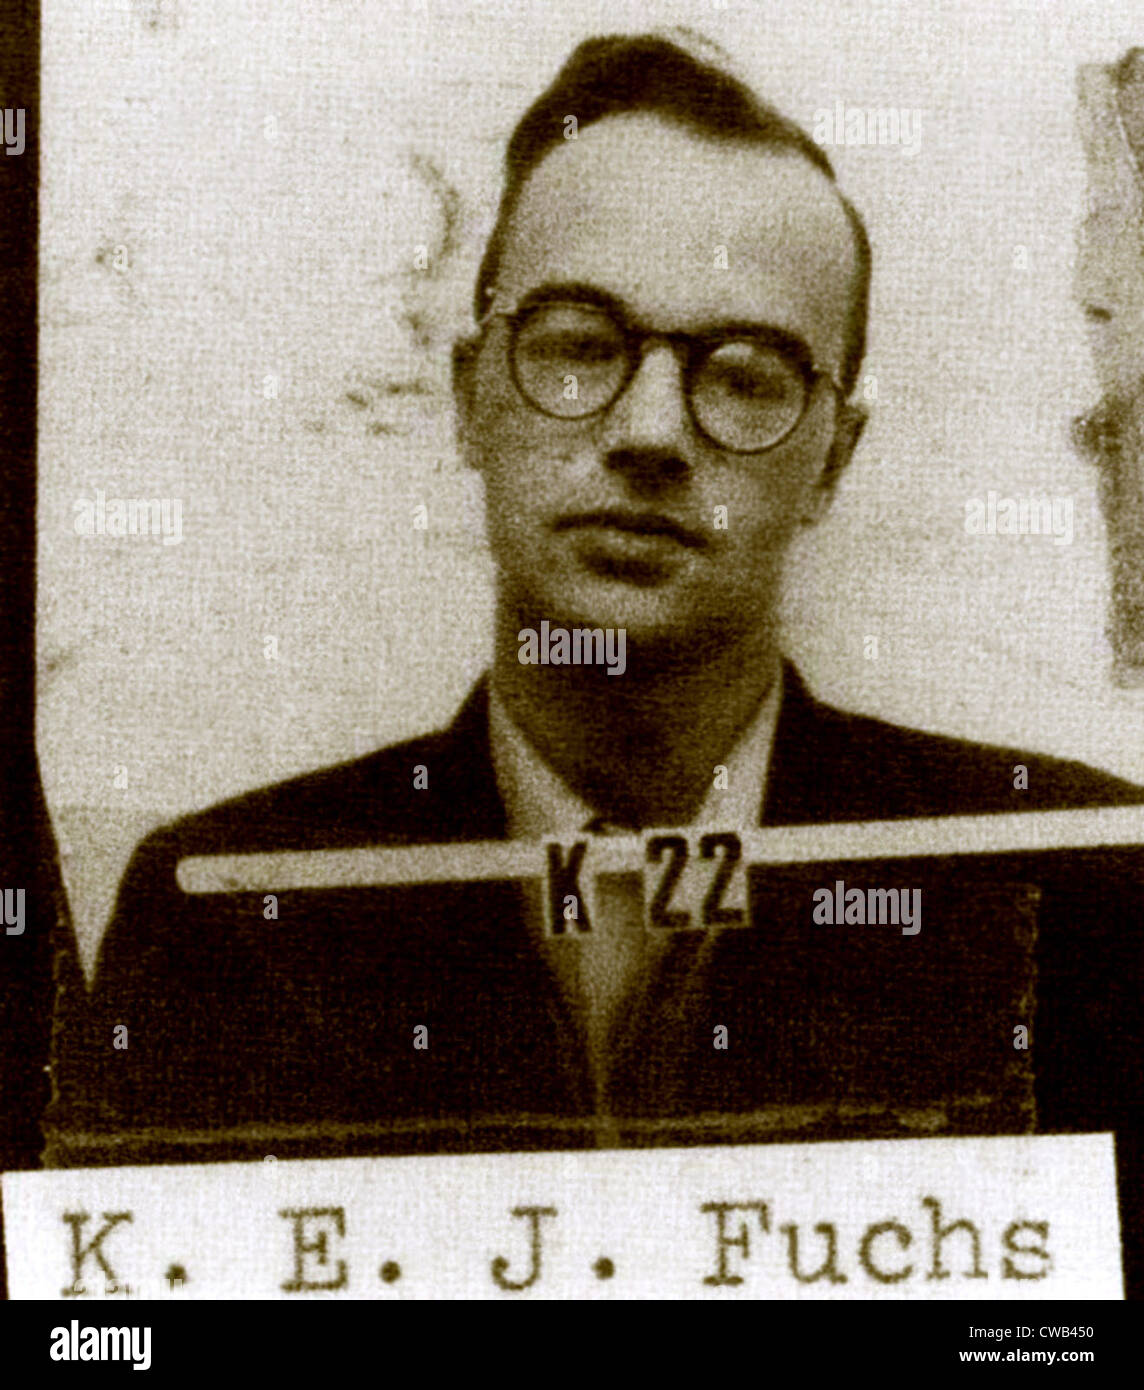 Klaus Fuchs, German-born physicist and atomic spy for the USSR during the Manhattan Project. Los Alamos ID badge photo, ca. 1944 Stock Photo